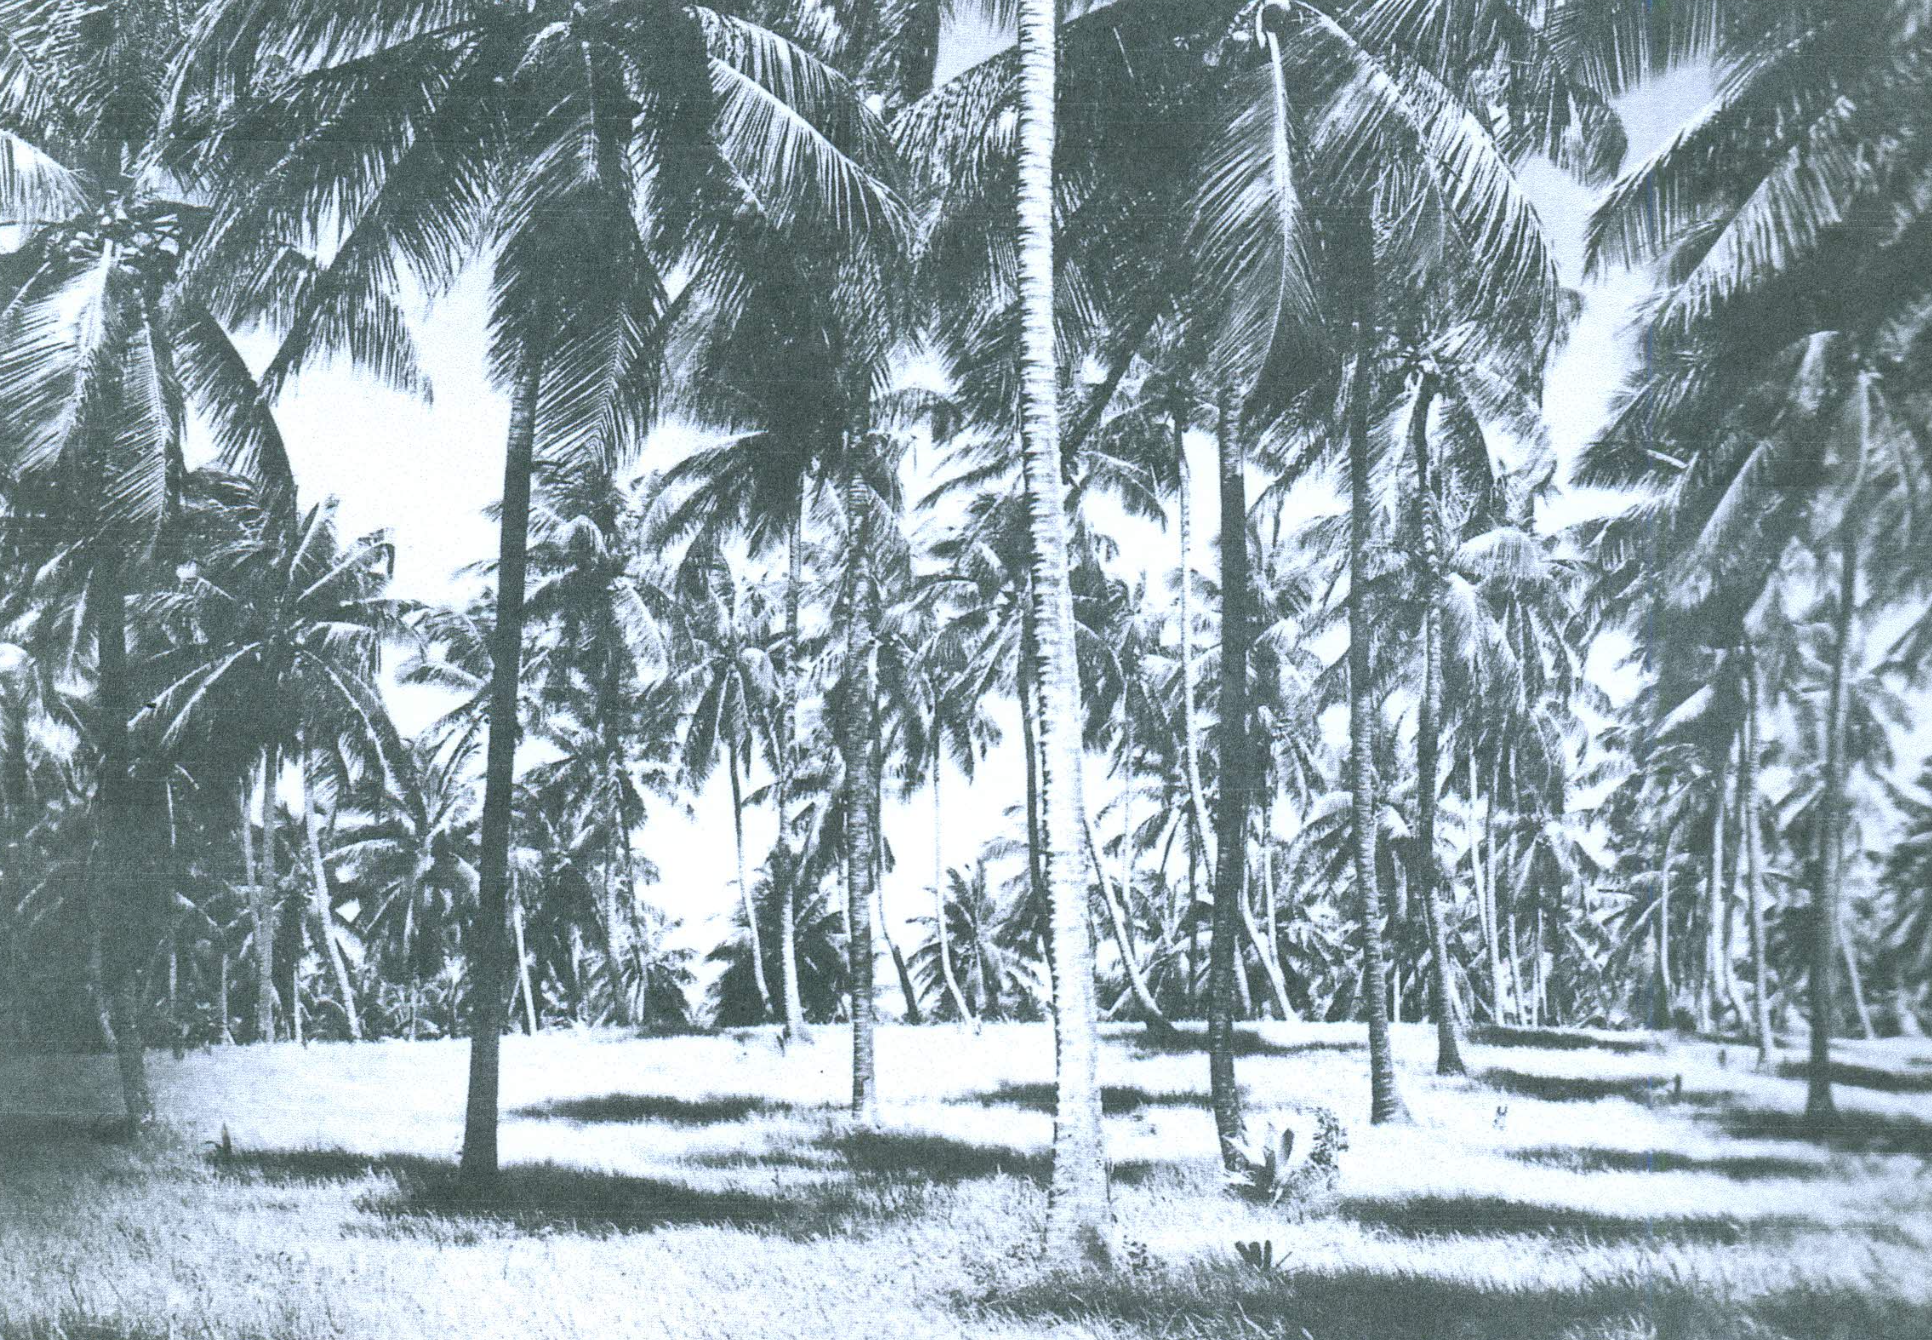 This is how I remember Magens Bay Beach as a boy climbing the coconut trees. These tall coconut trees are no longer there. Most of them were destroyed by hurricanes in the last 30 years. This photo was taken in 1965 by the USDA Soil Conservation Service.